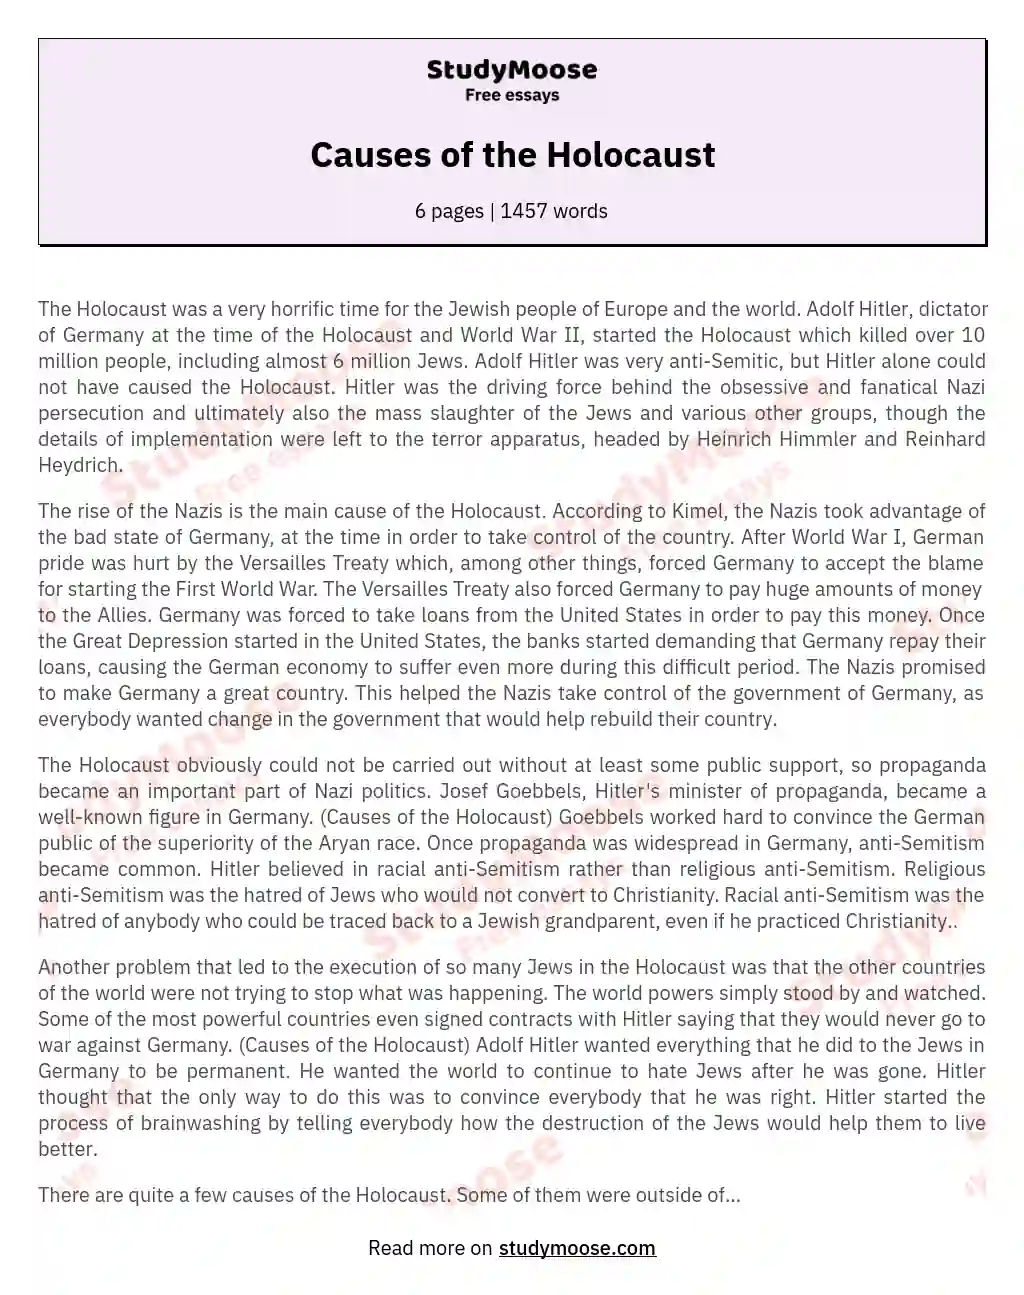 Responsibility for the Holocaust: Beyond Hitler's Actions essay